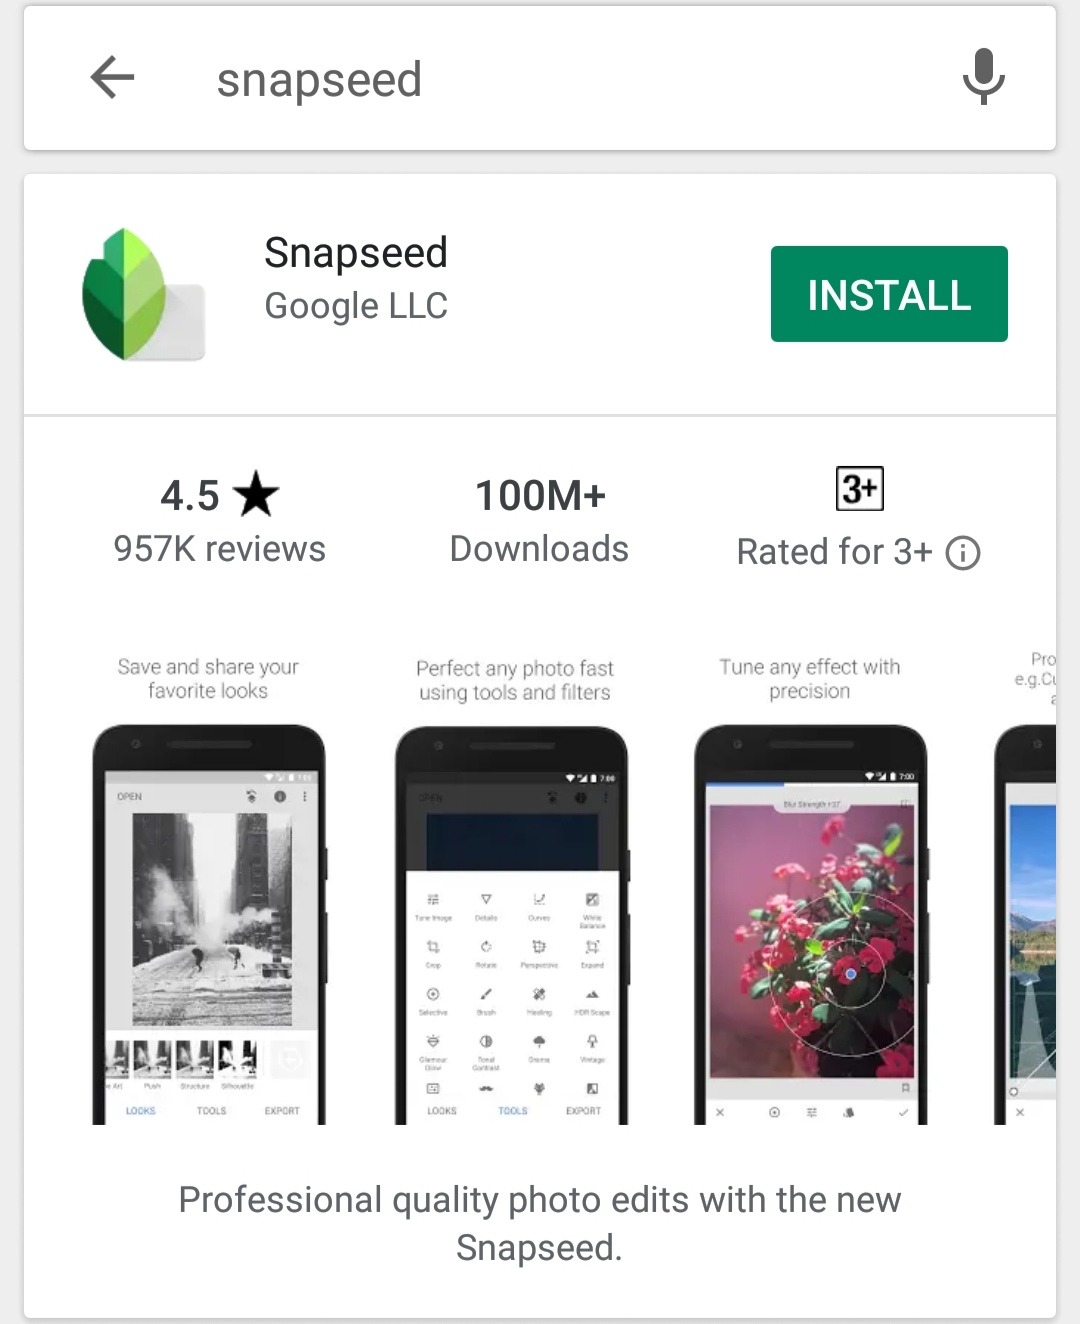 google snapseed for pc